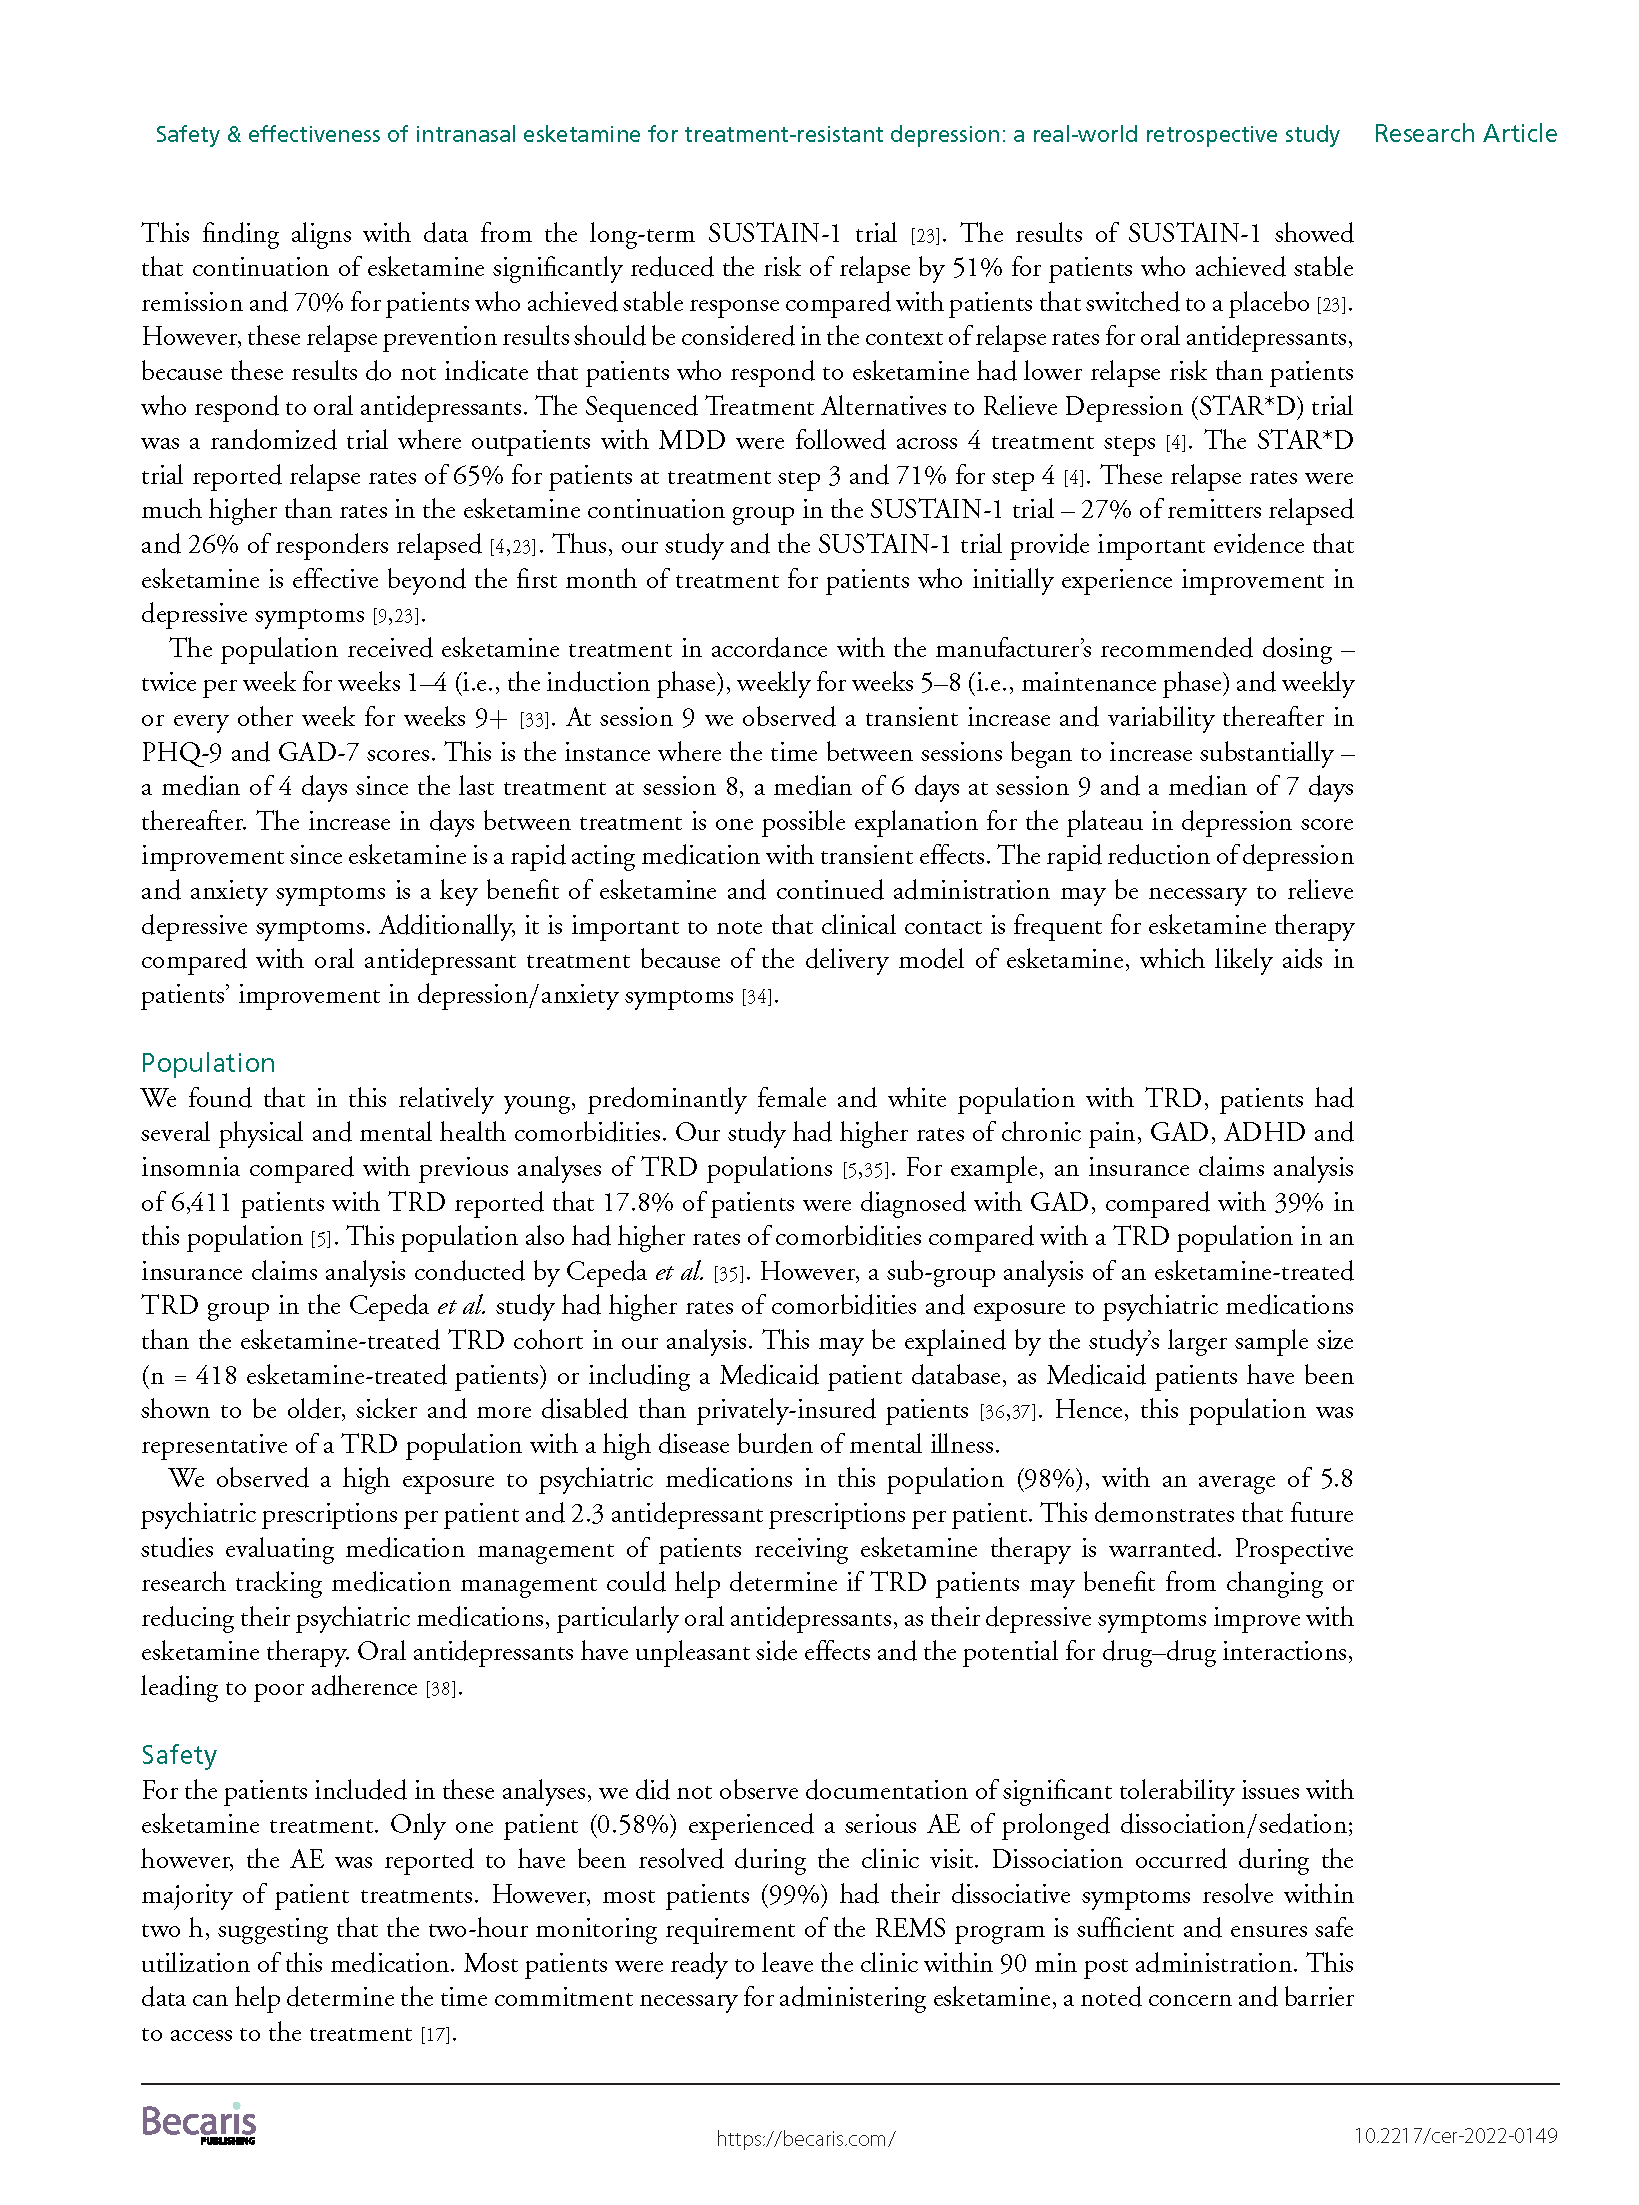 Safety and effectiveness of intranasal esketamine for TRD_a real-world retrospective study_Brendle 2022 (1)_Page_11.png